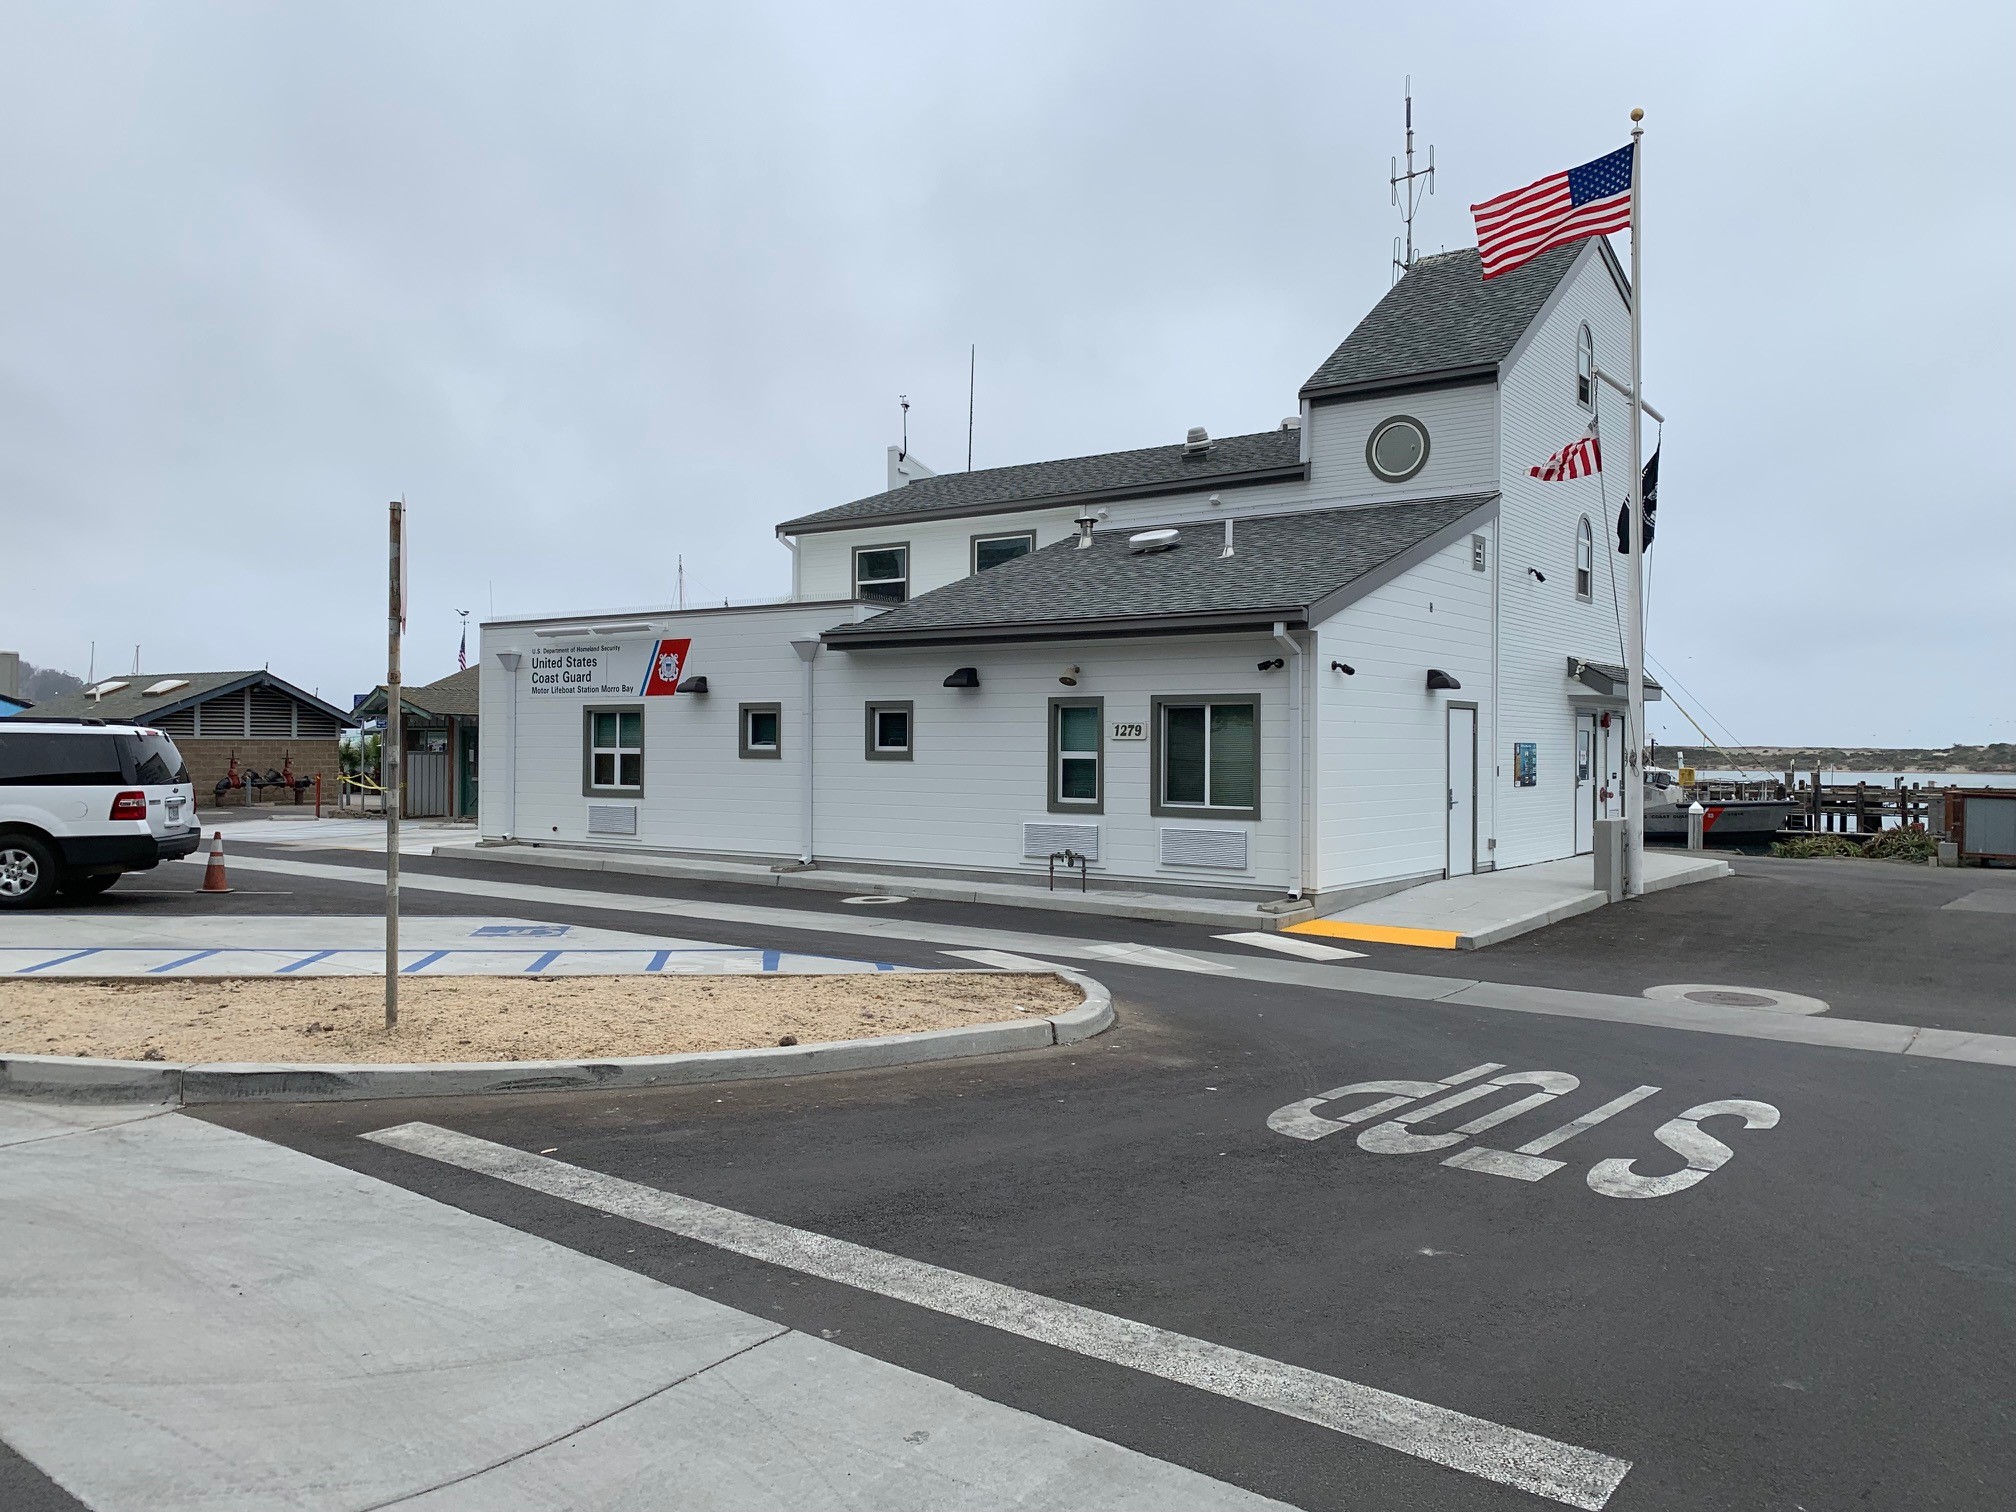 Station Morro Bay expansion project finished construction in early September, 2021